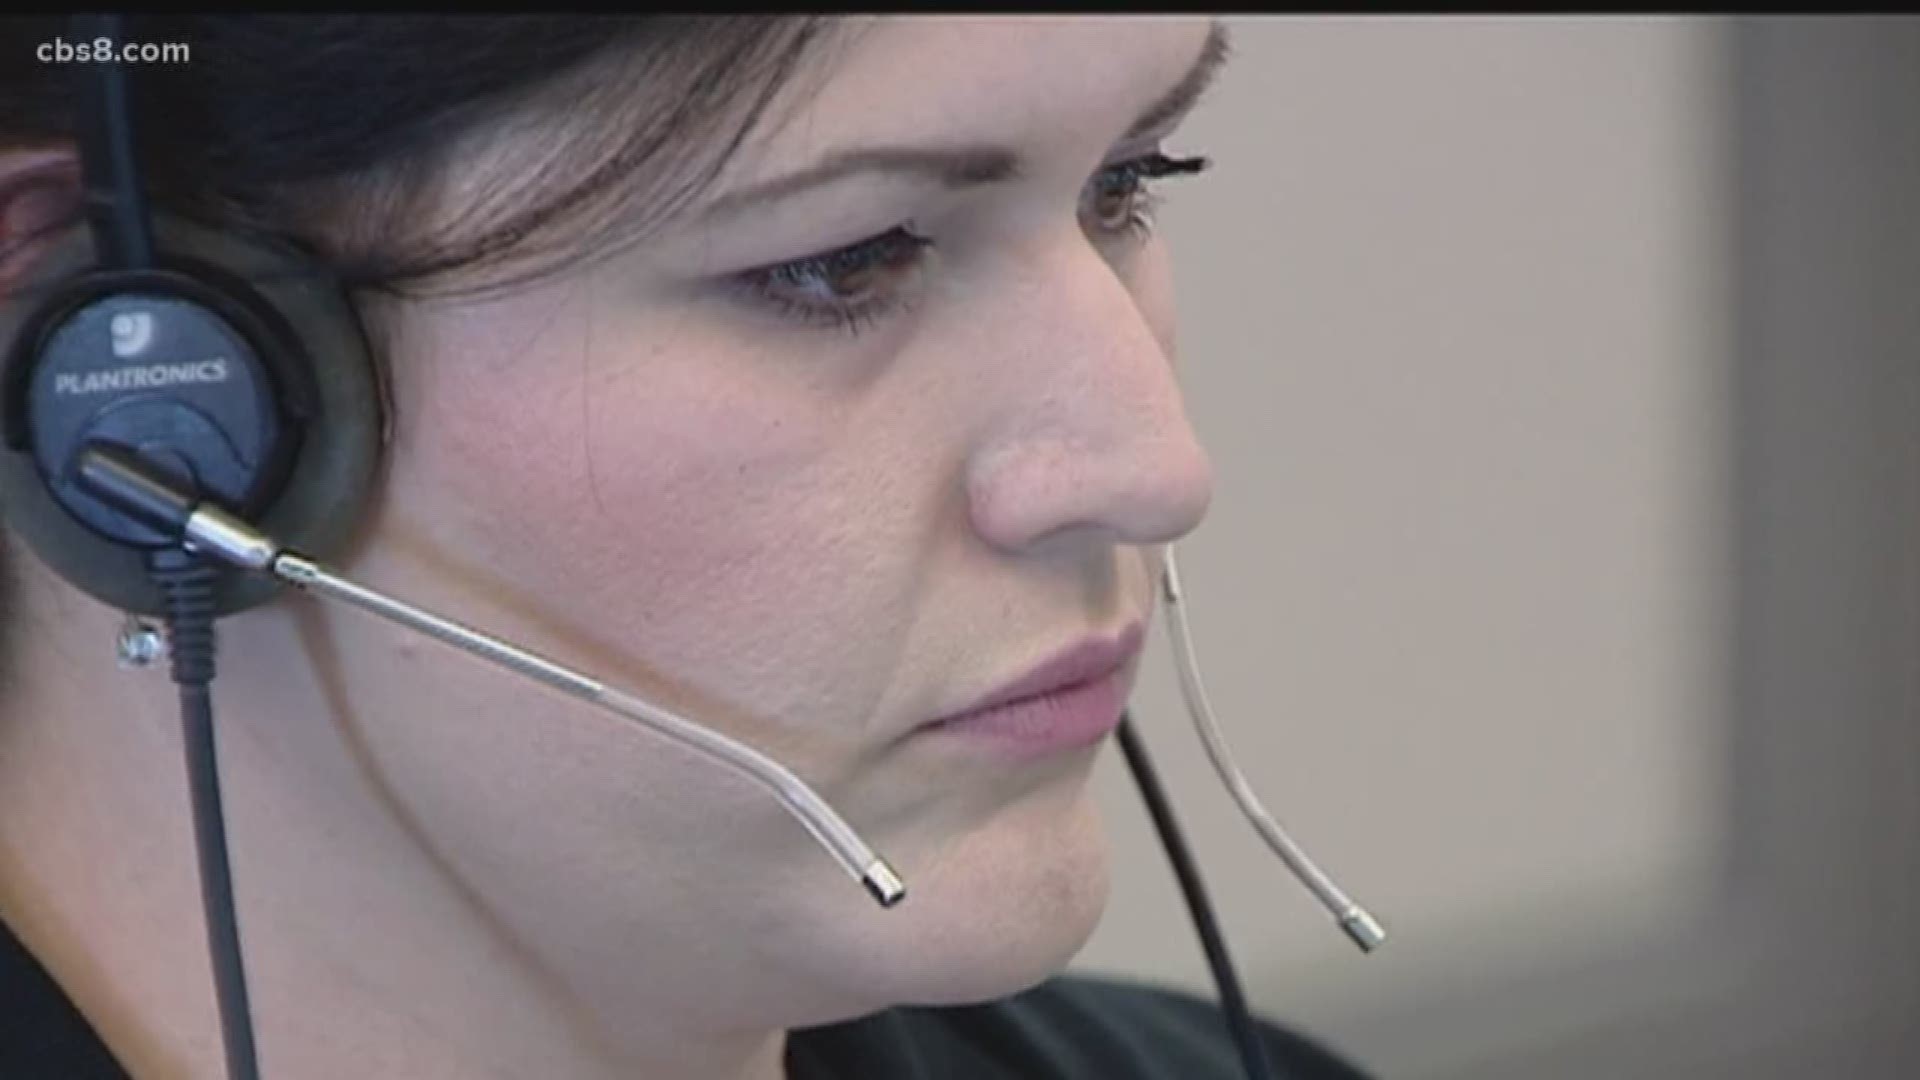 This new program promises to be a more effective and efficient way to connect 911 callers who are seeking medical assistance with the appropriate care they need.